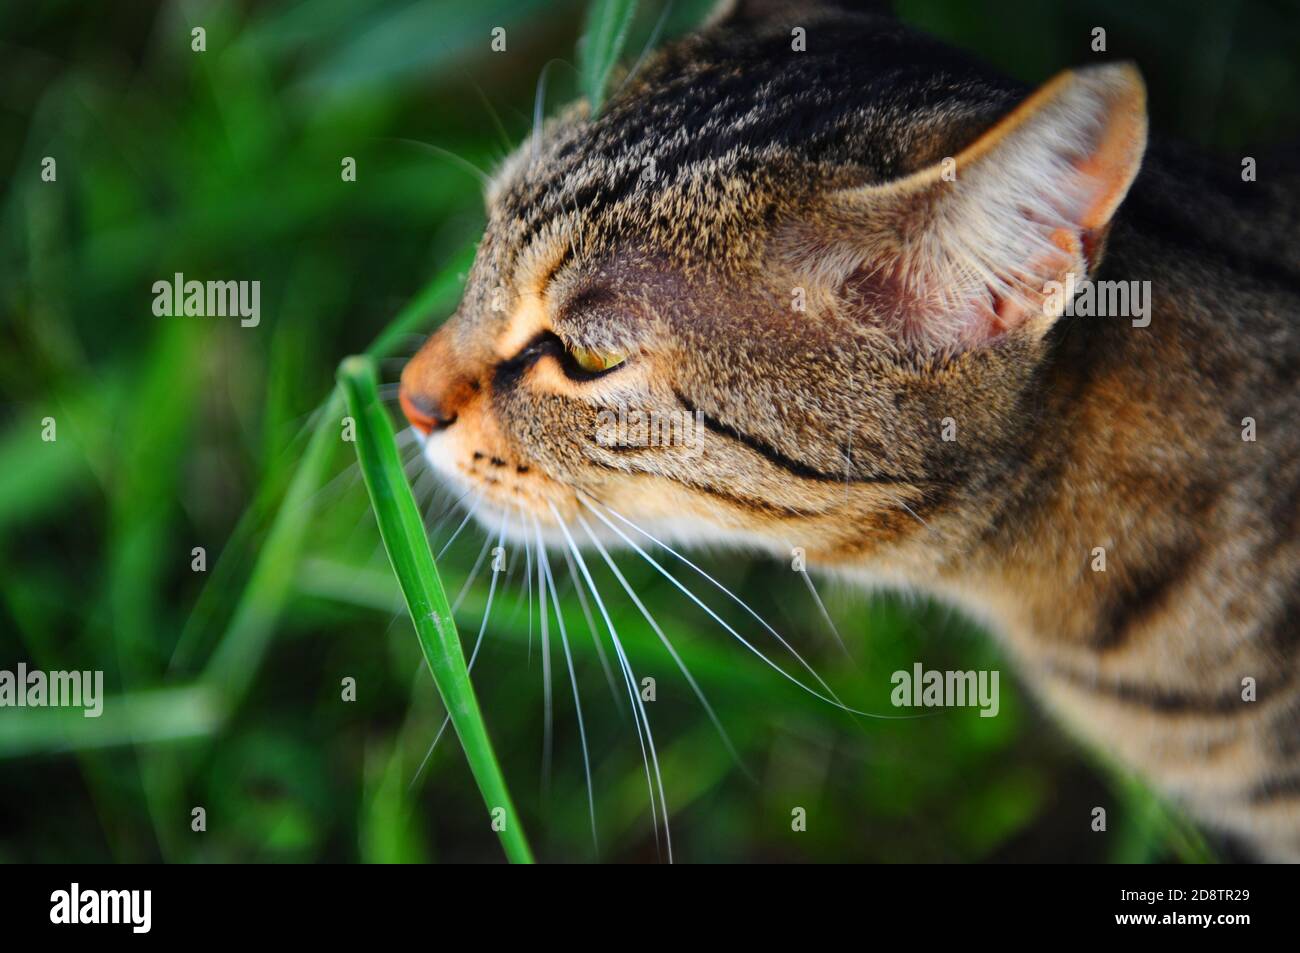 The cat sniffs the grass and warms up in the sun Stock Photo